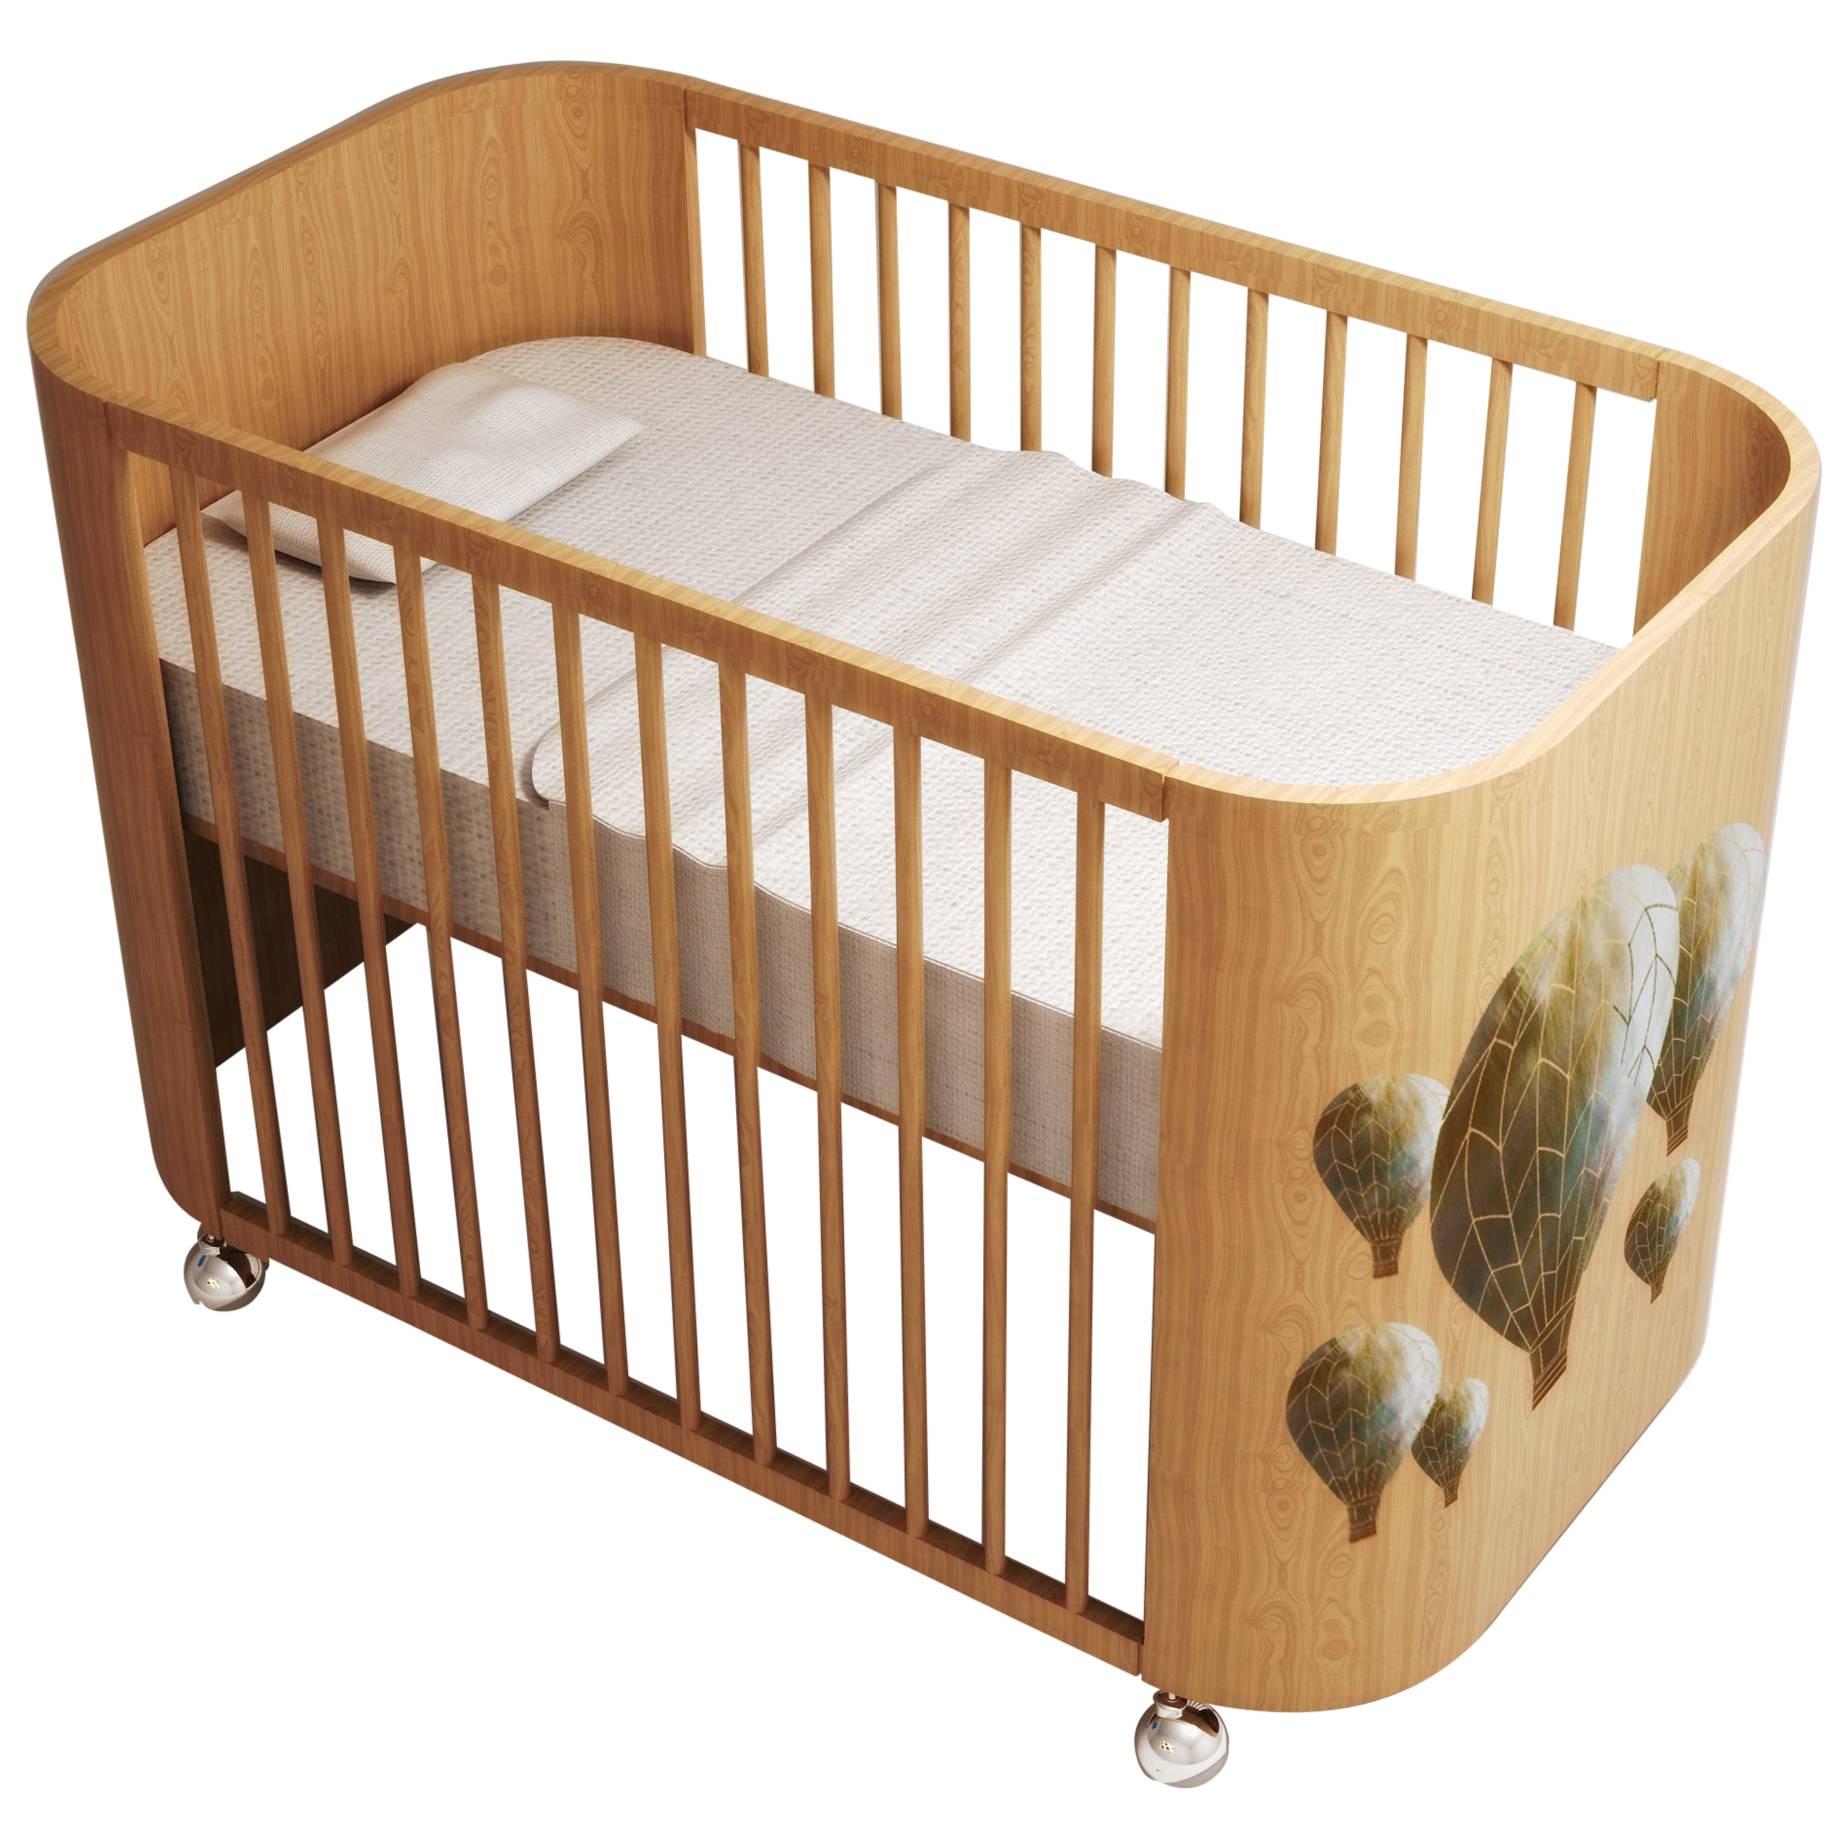 Embrace Adventure Crib in Natural Beech Wood by MISK Nursery For Sale